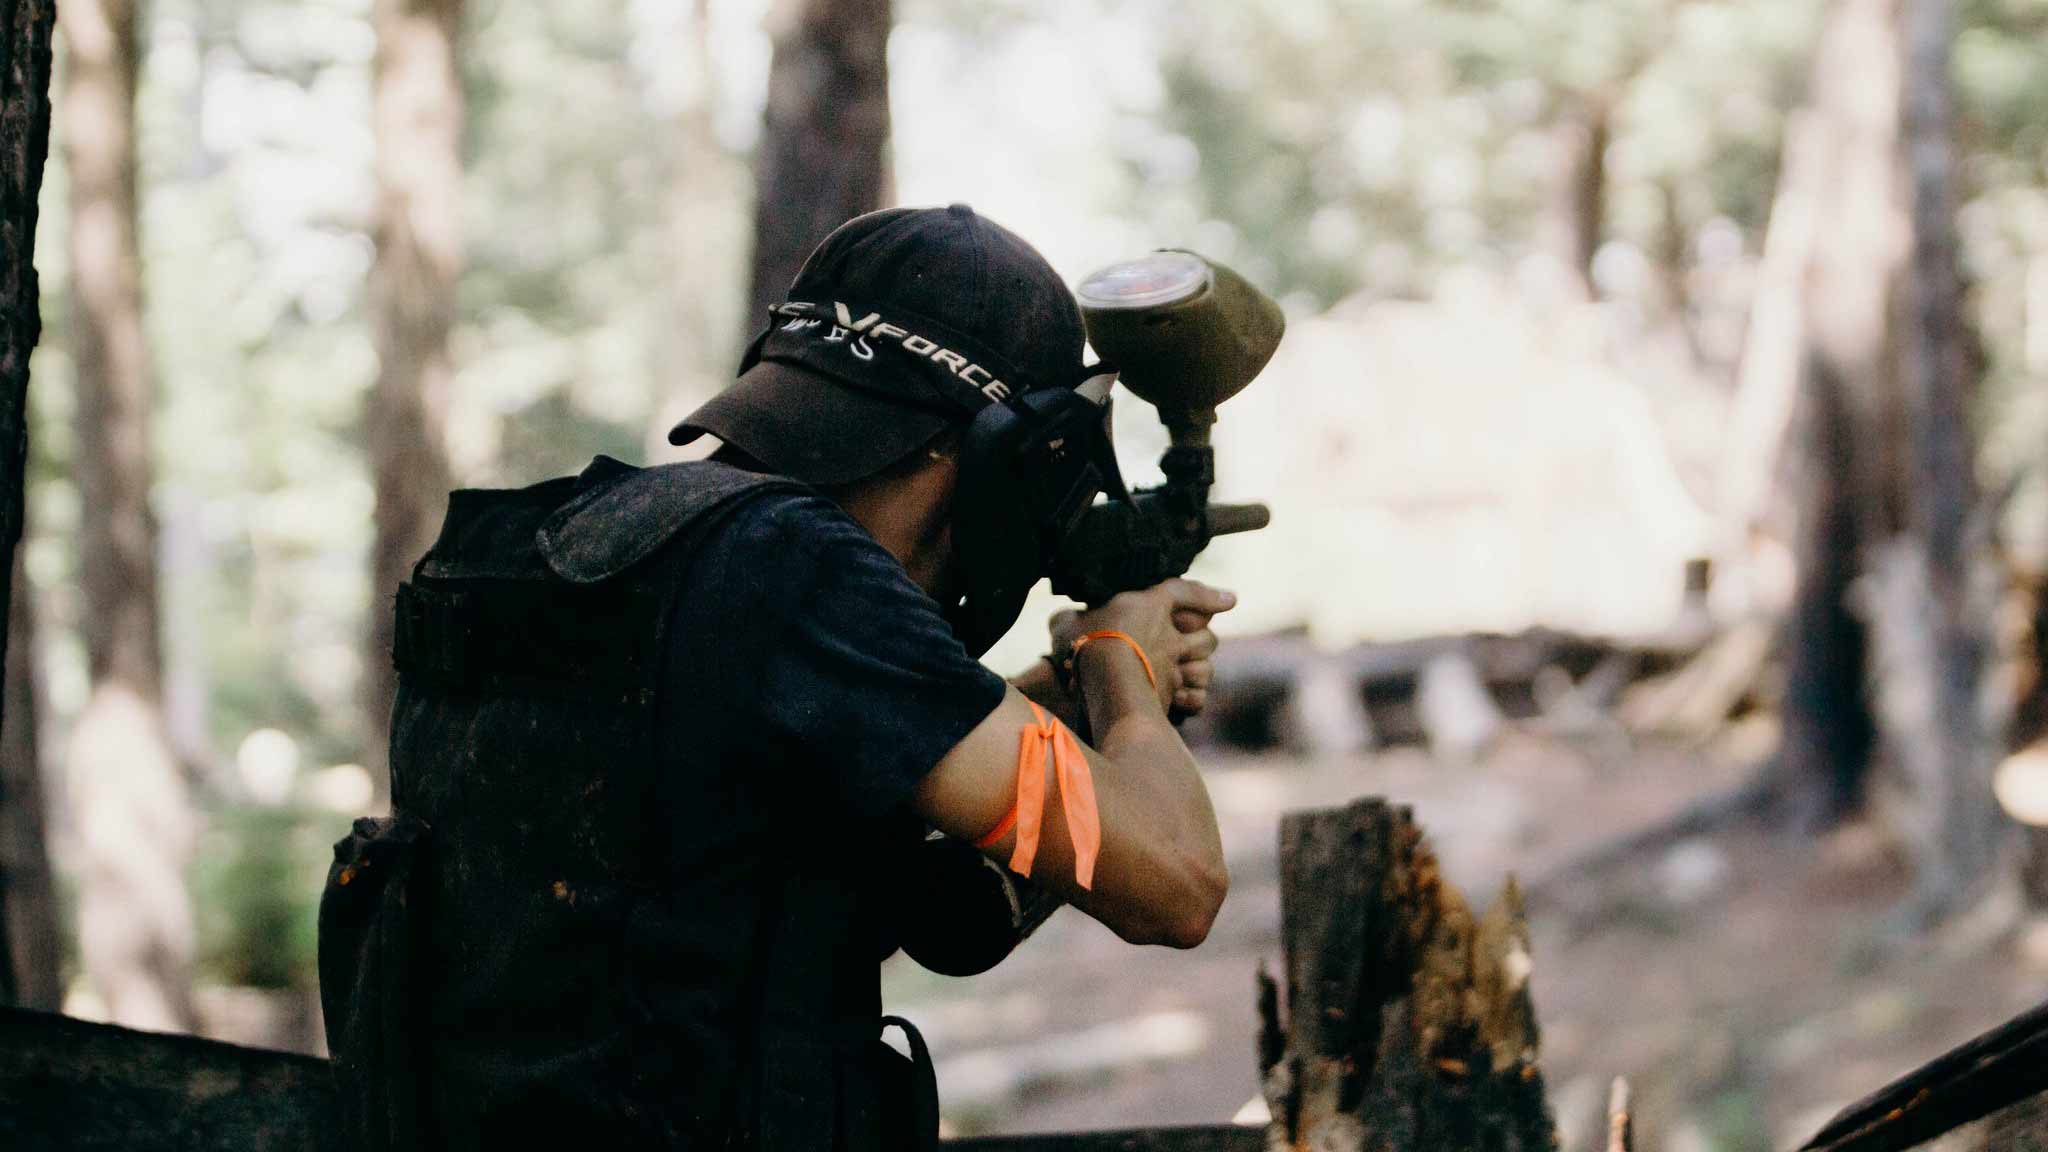 man playing paintball in the woods.